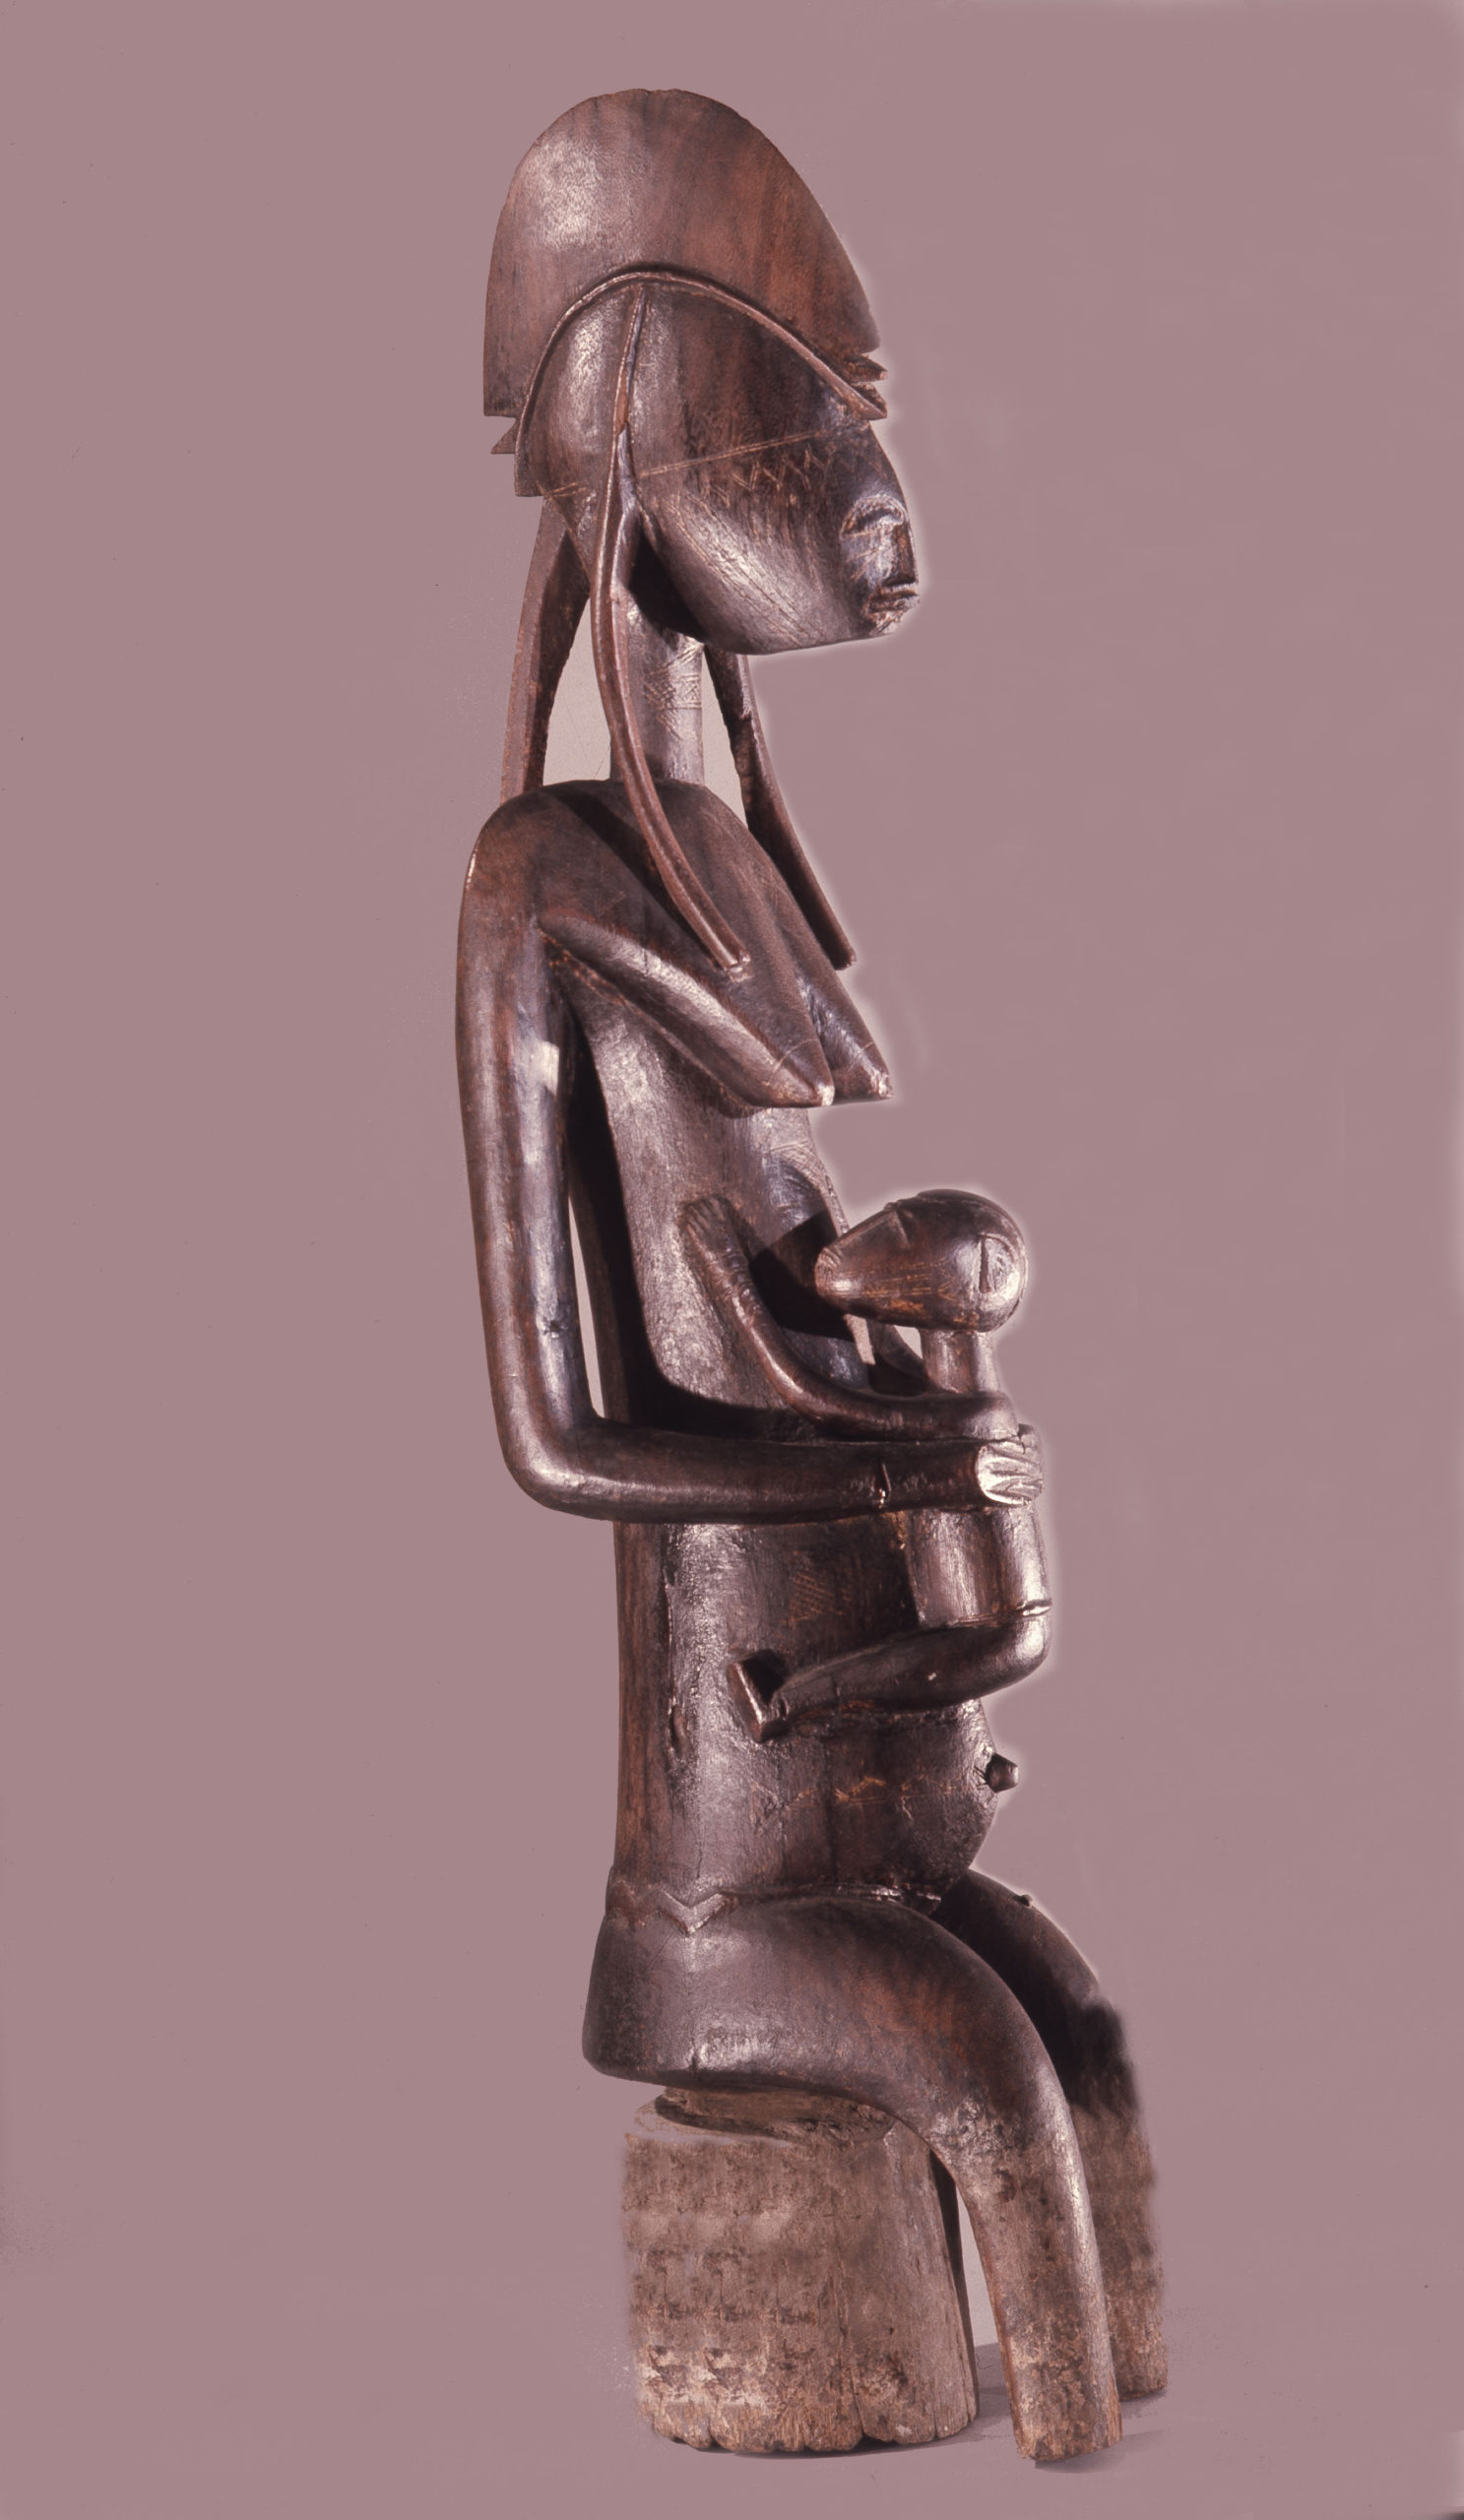 A side view of a wooden sculpture of a seated woman holding a baby with an elongated body and pointed breasts